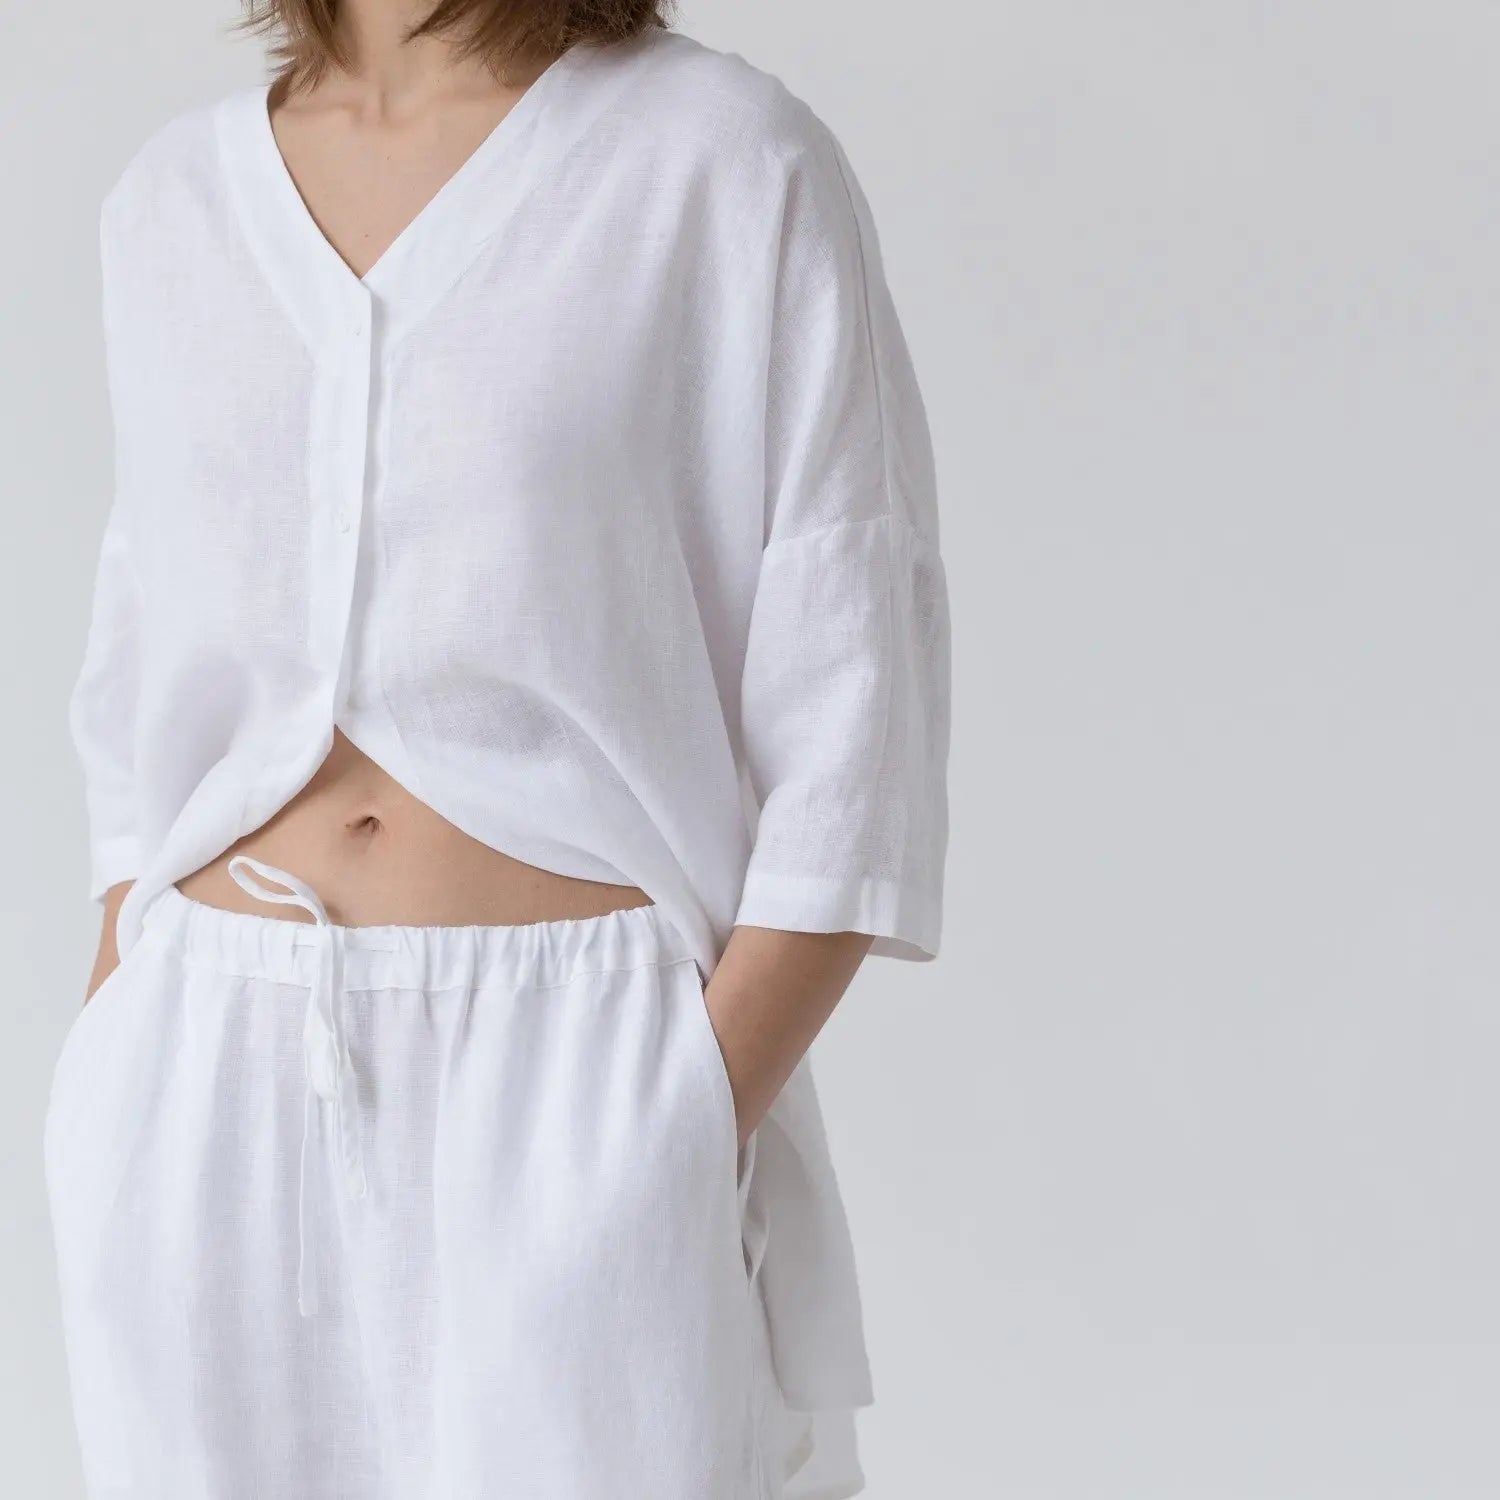 A woman in white linen Primrose loungewear set, featuring a V-neck shirt with buttoned front and 3/4 sleeves, paired with relaxed-fit trousers and slanted pockets. Handmade from 100% linen, perfect for lounging.